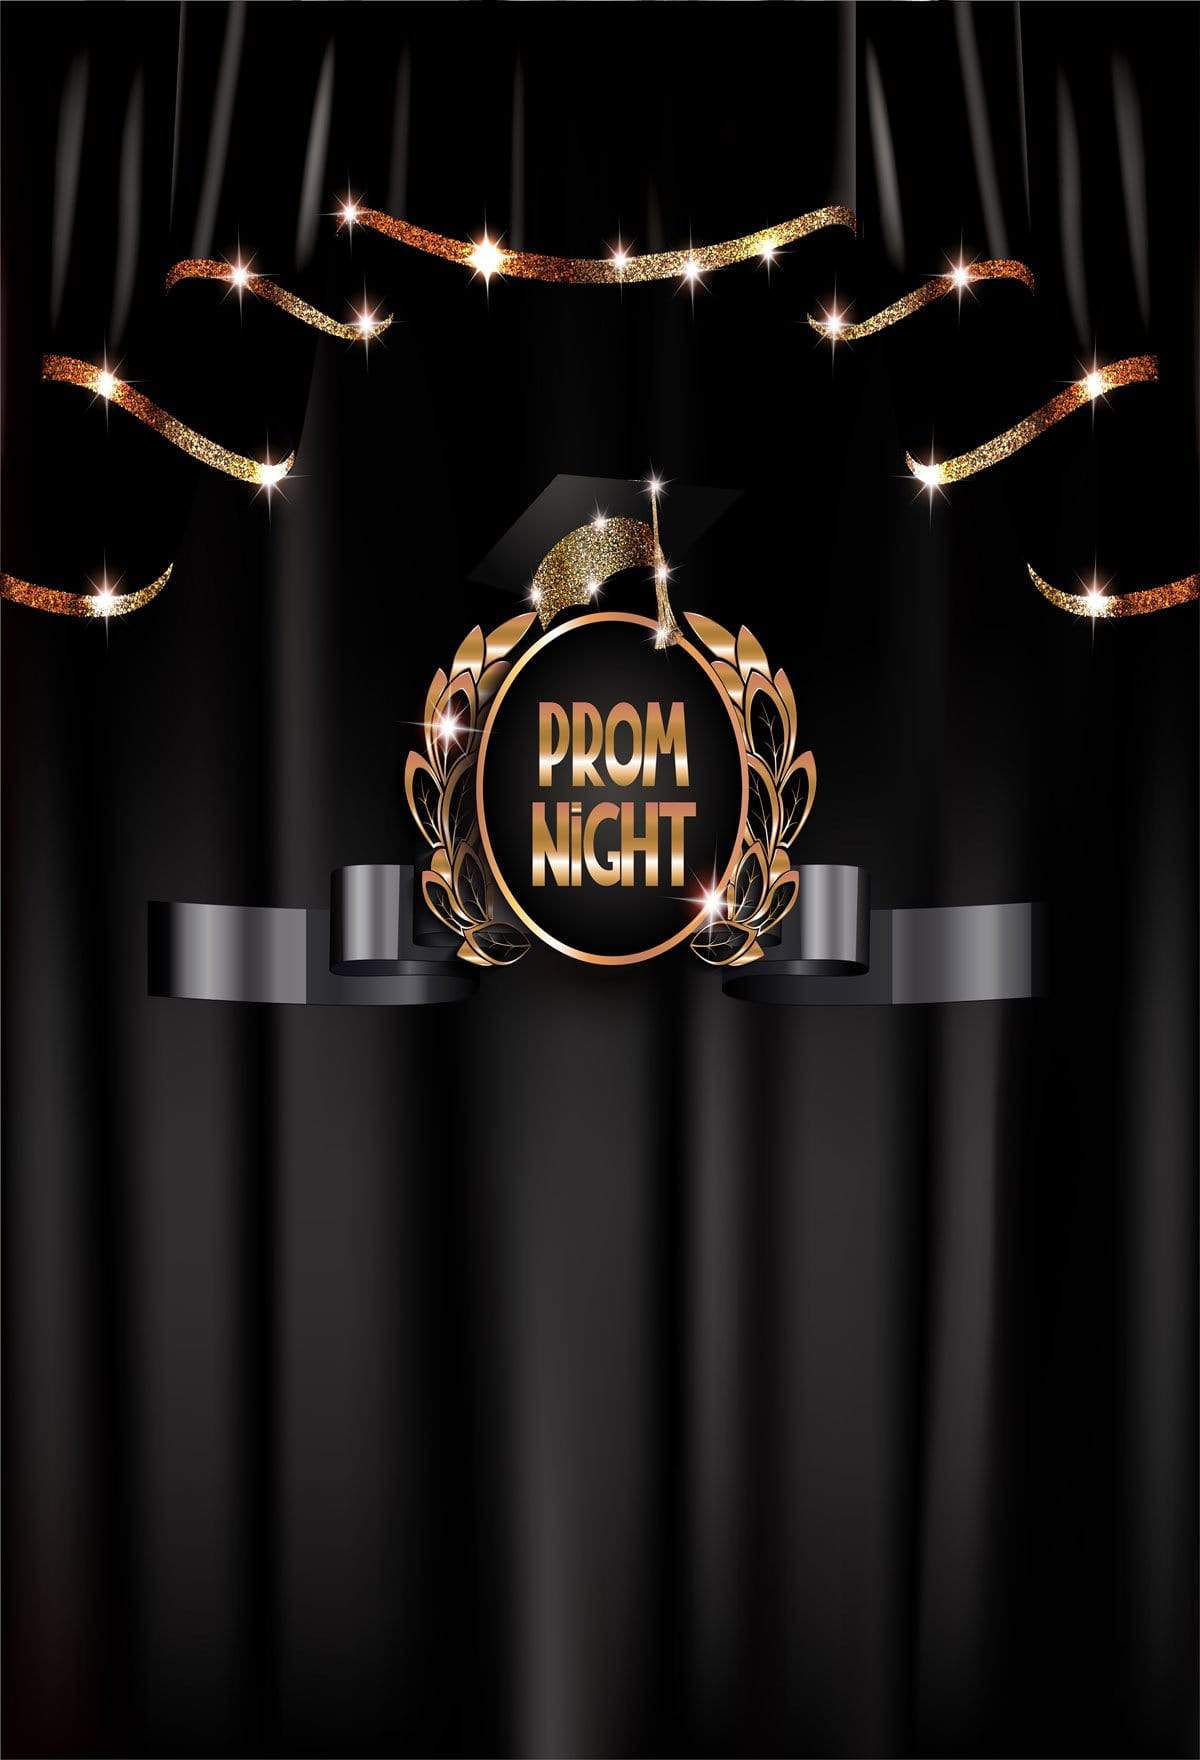 Kate Prom Night Graduation Backdrop Black Curtain Background for School